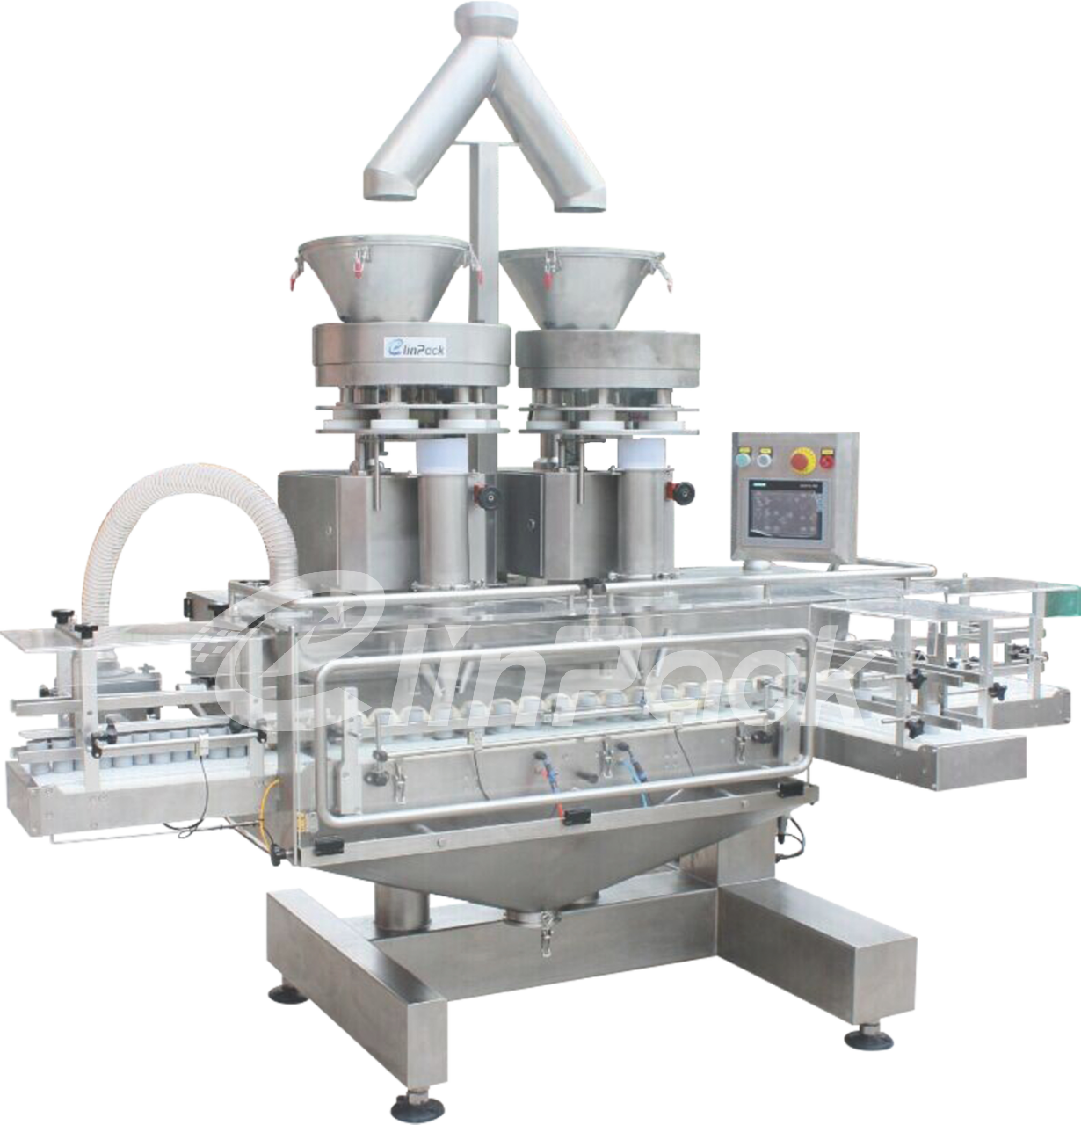 Auger filling machine should be maintained in cold winter